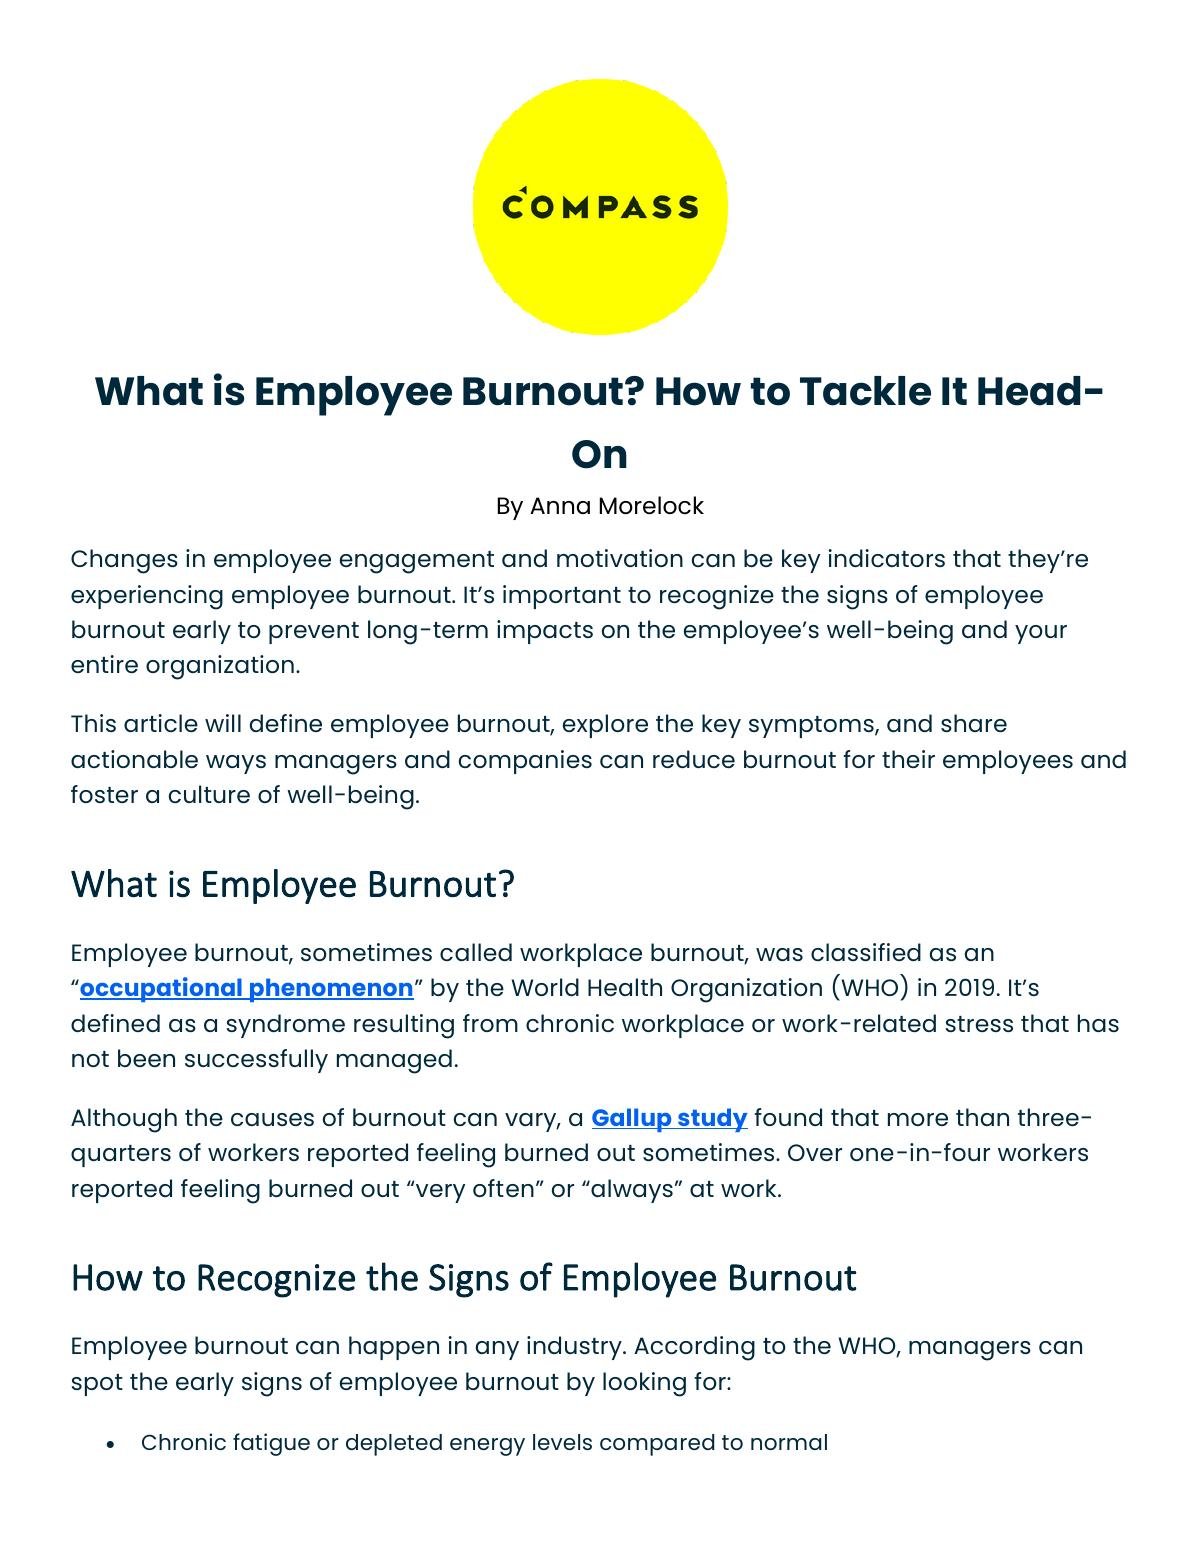 What is Employee Burnout? How to Tackle It Head-On